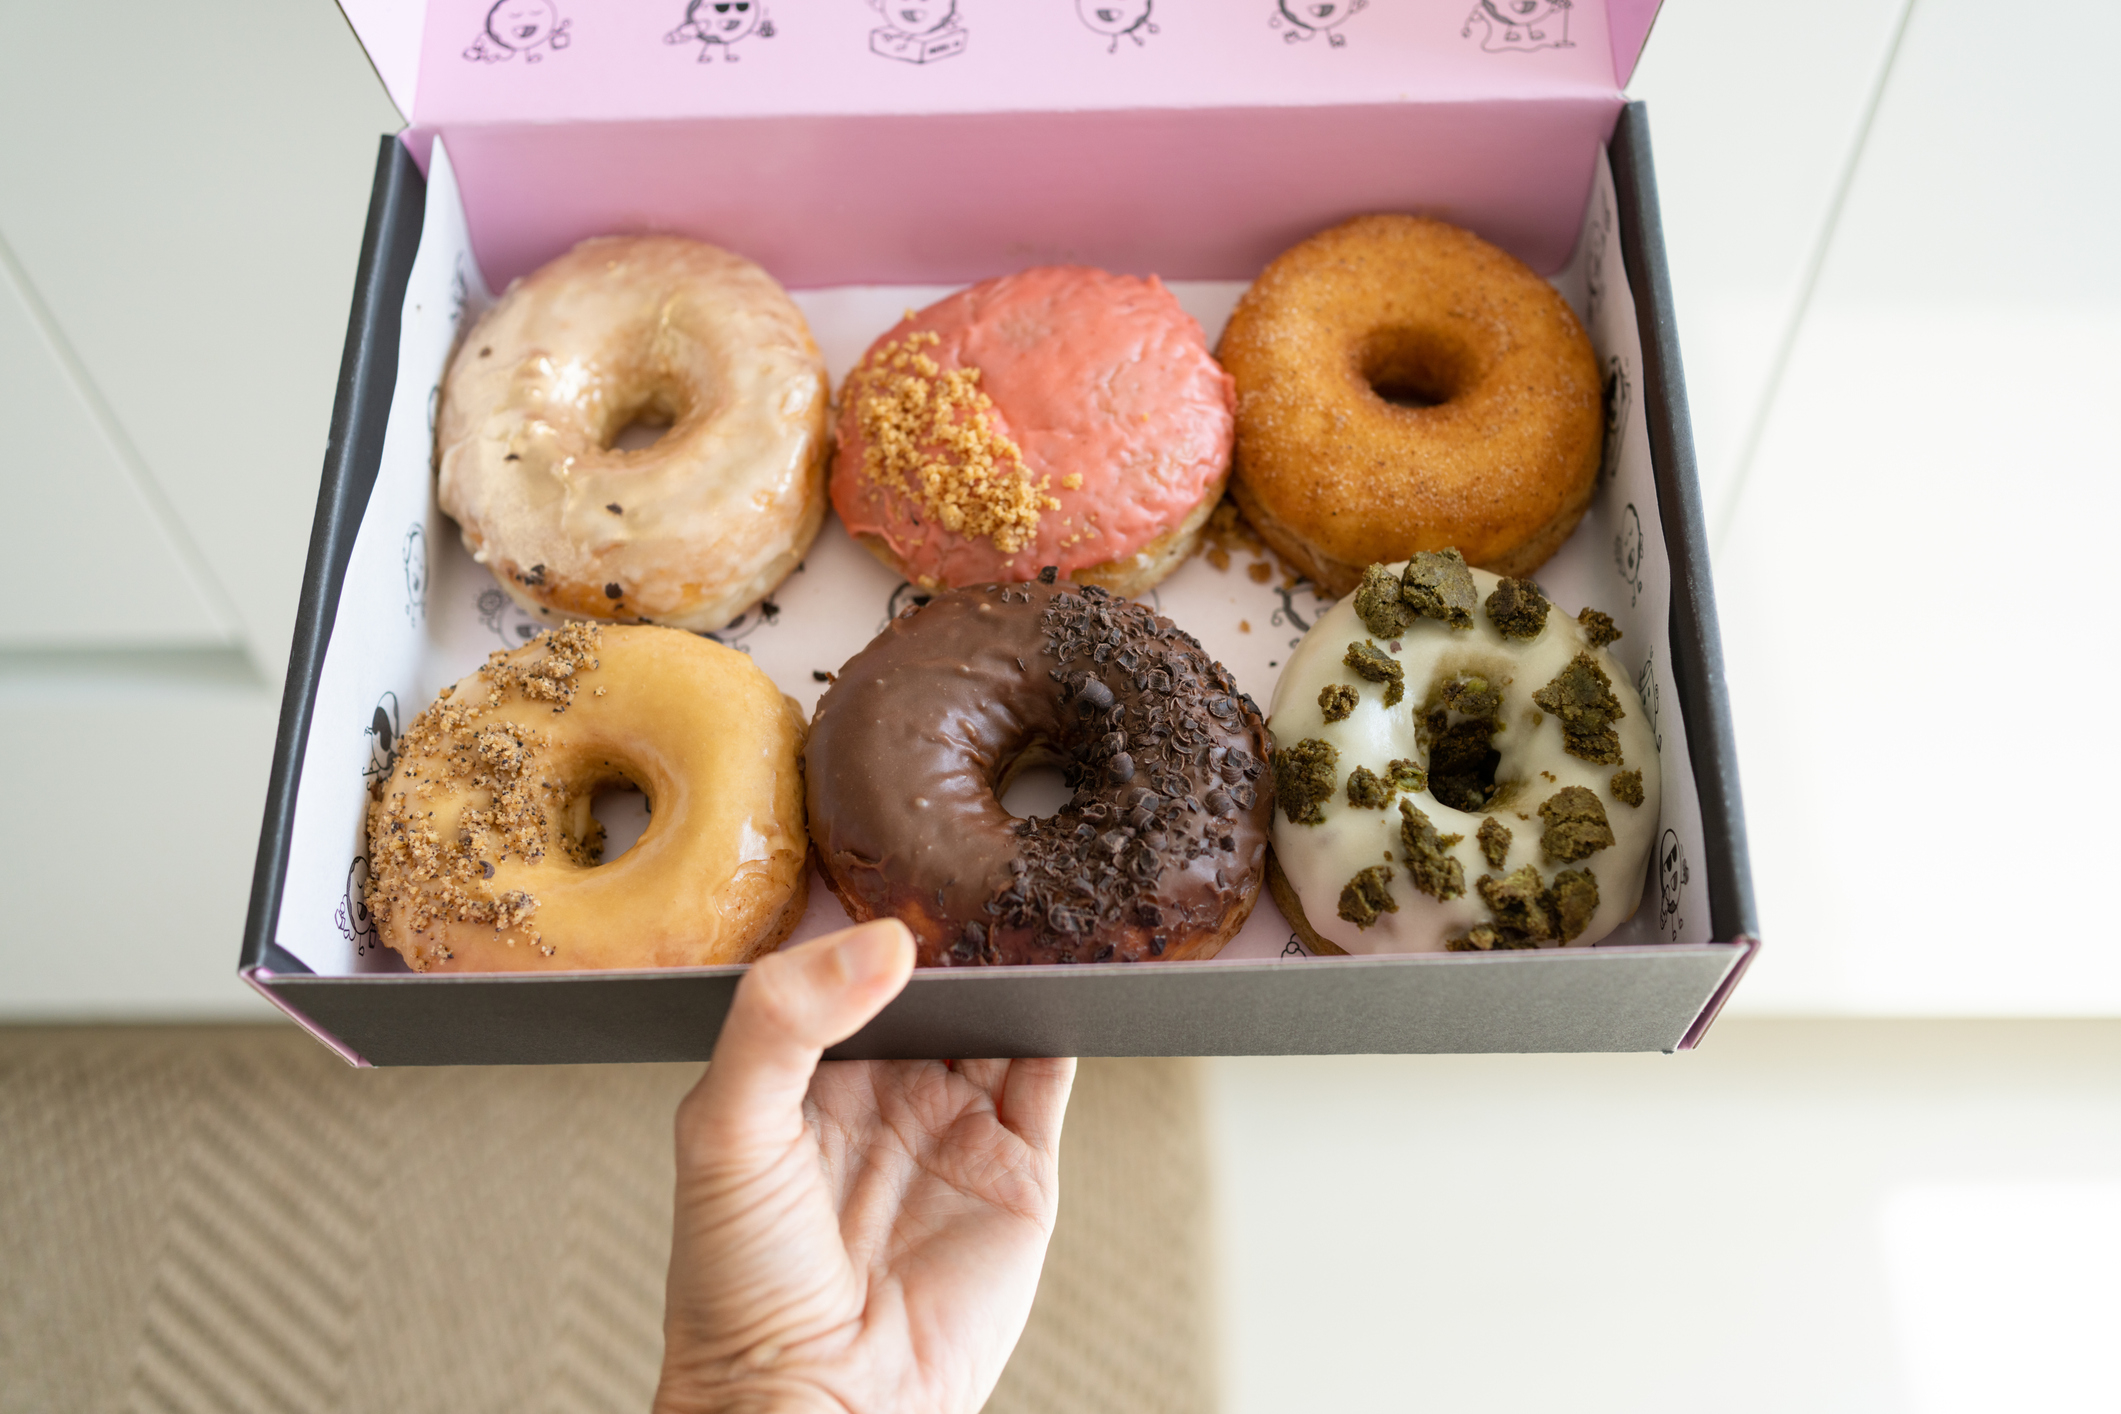 A box of donuts to share